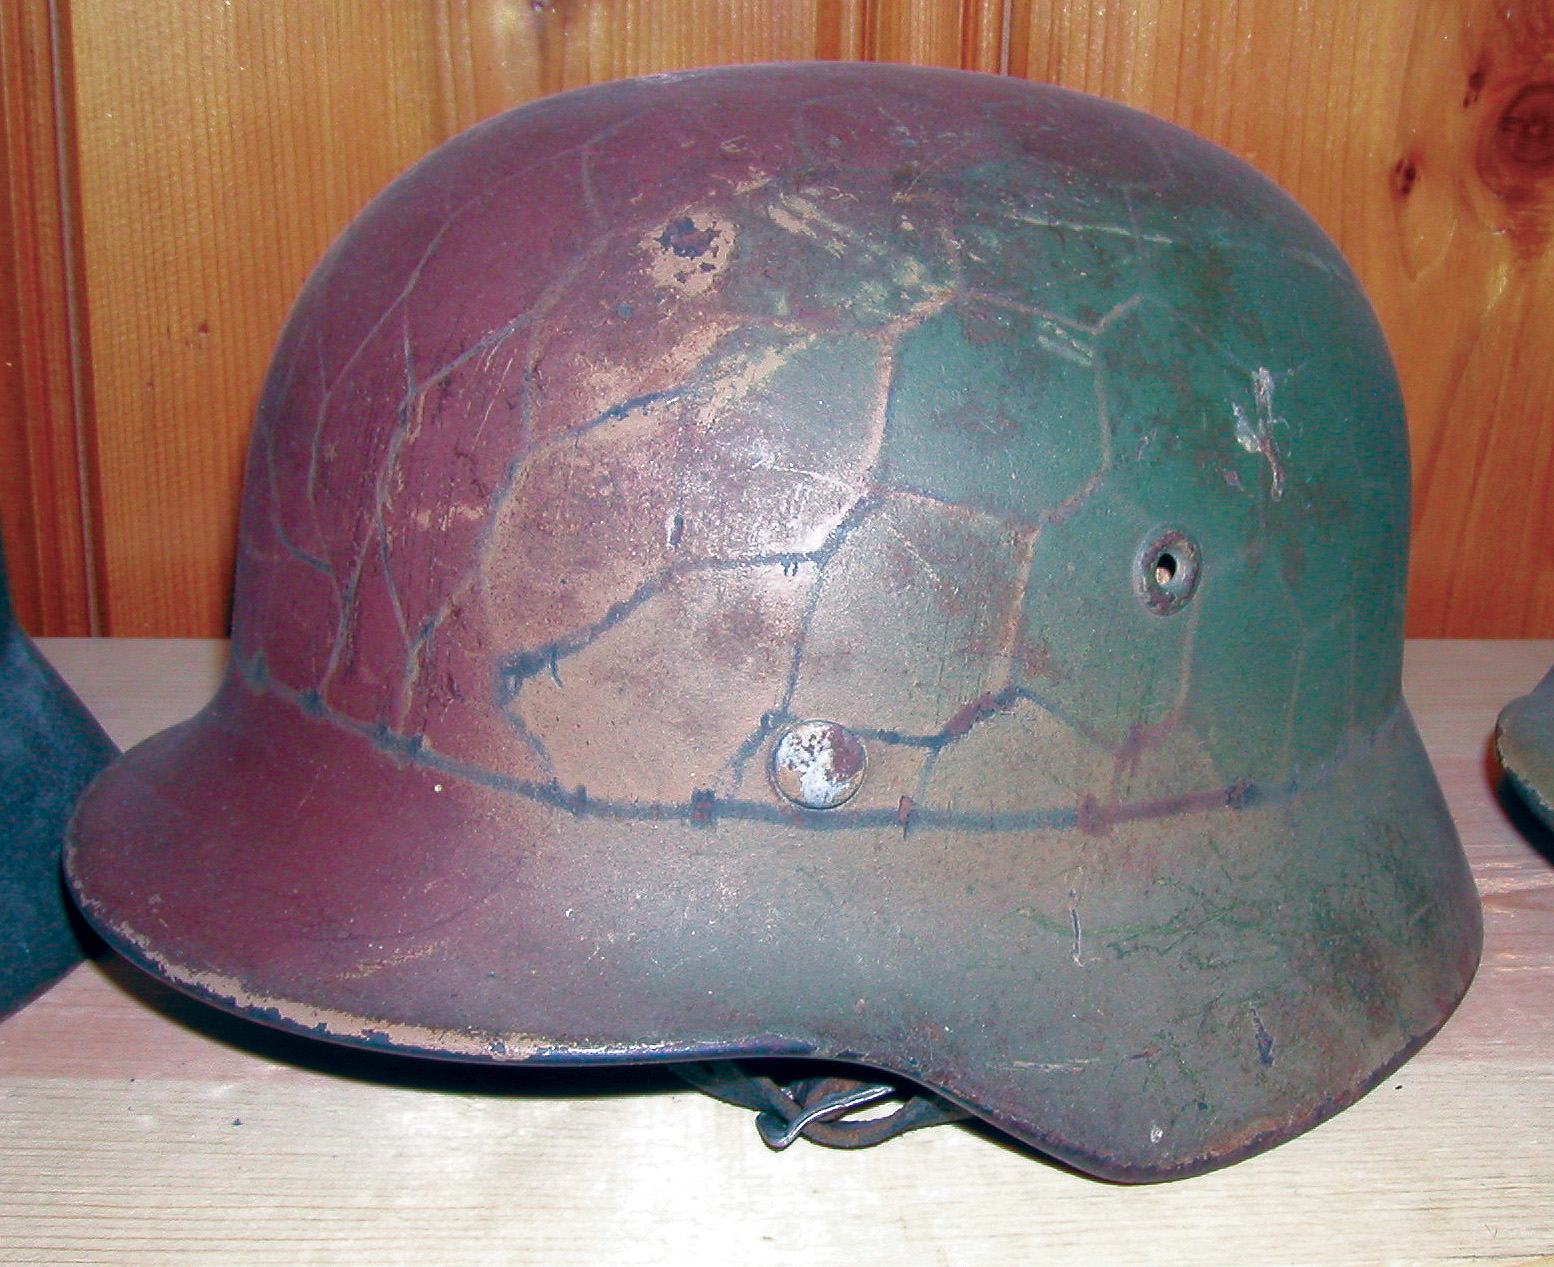 A helmet with some battlefield camouflage.